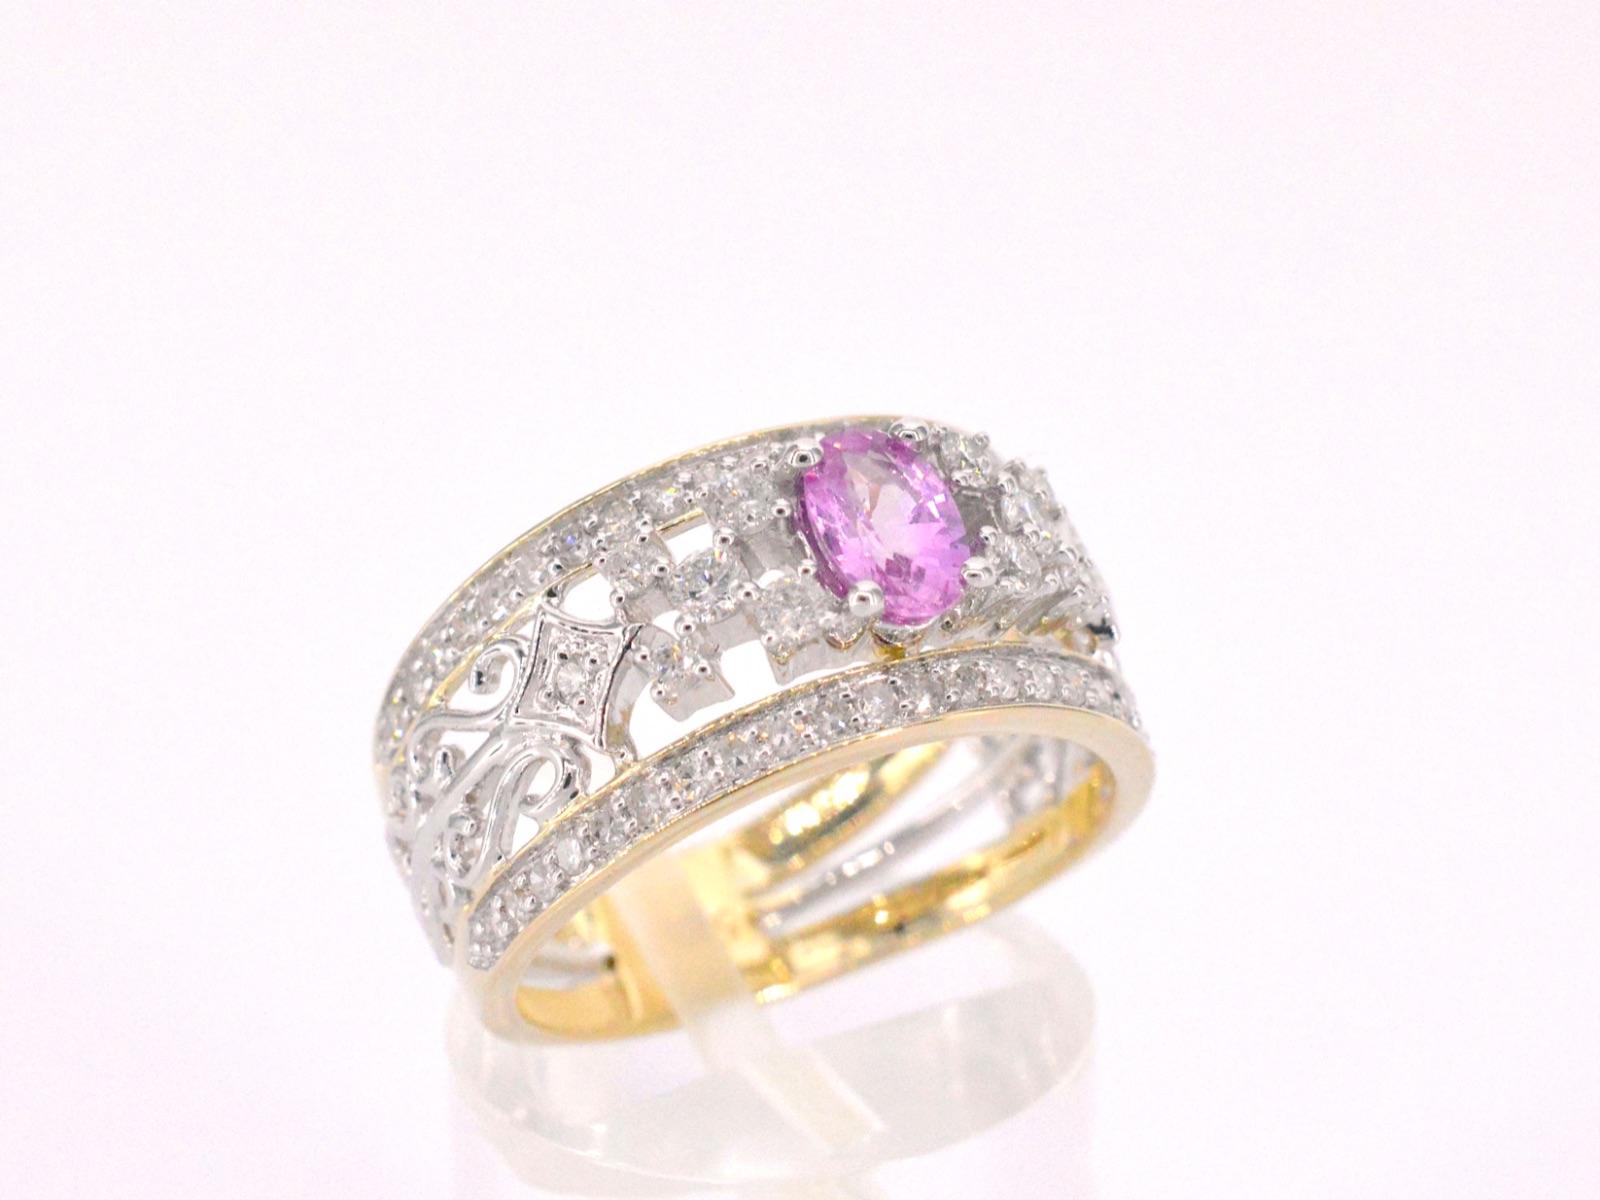 Women's Gold Exclusive Ring Full of Diamonds and a Gemstone For Sale